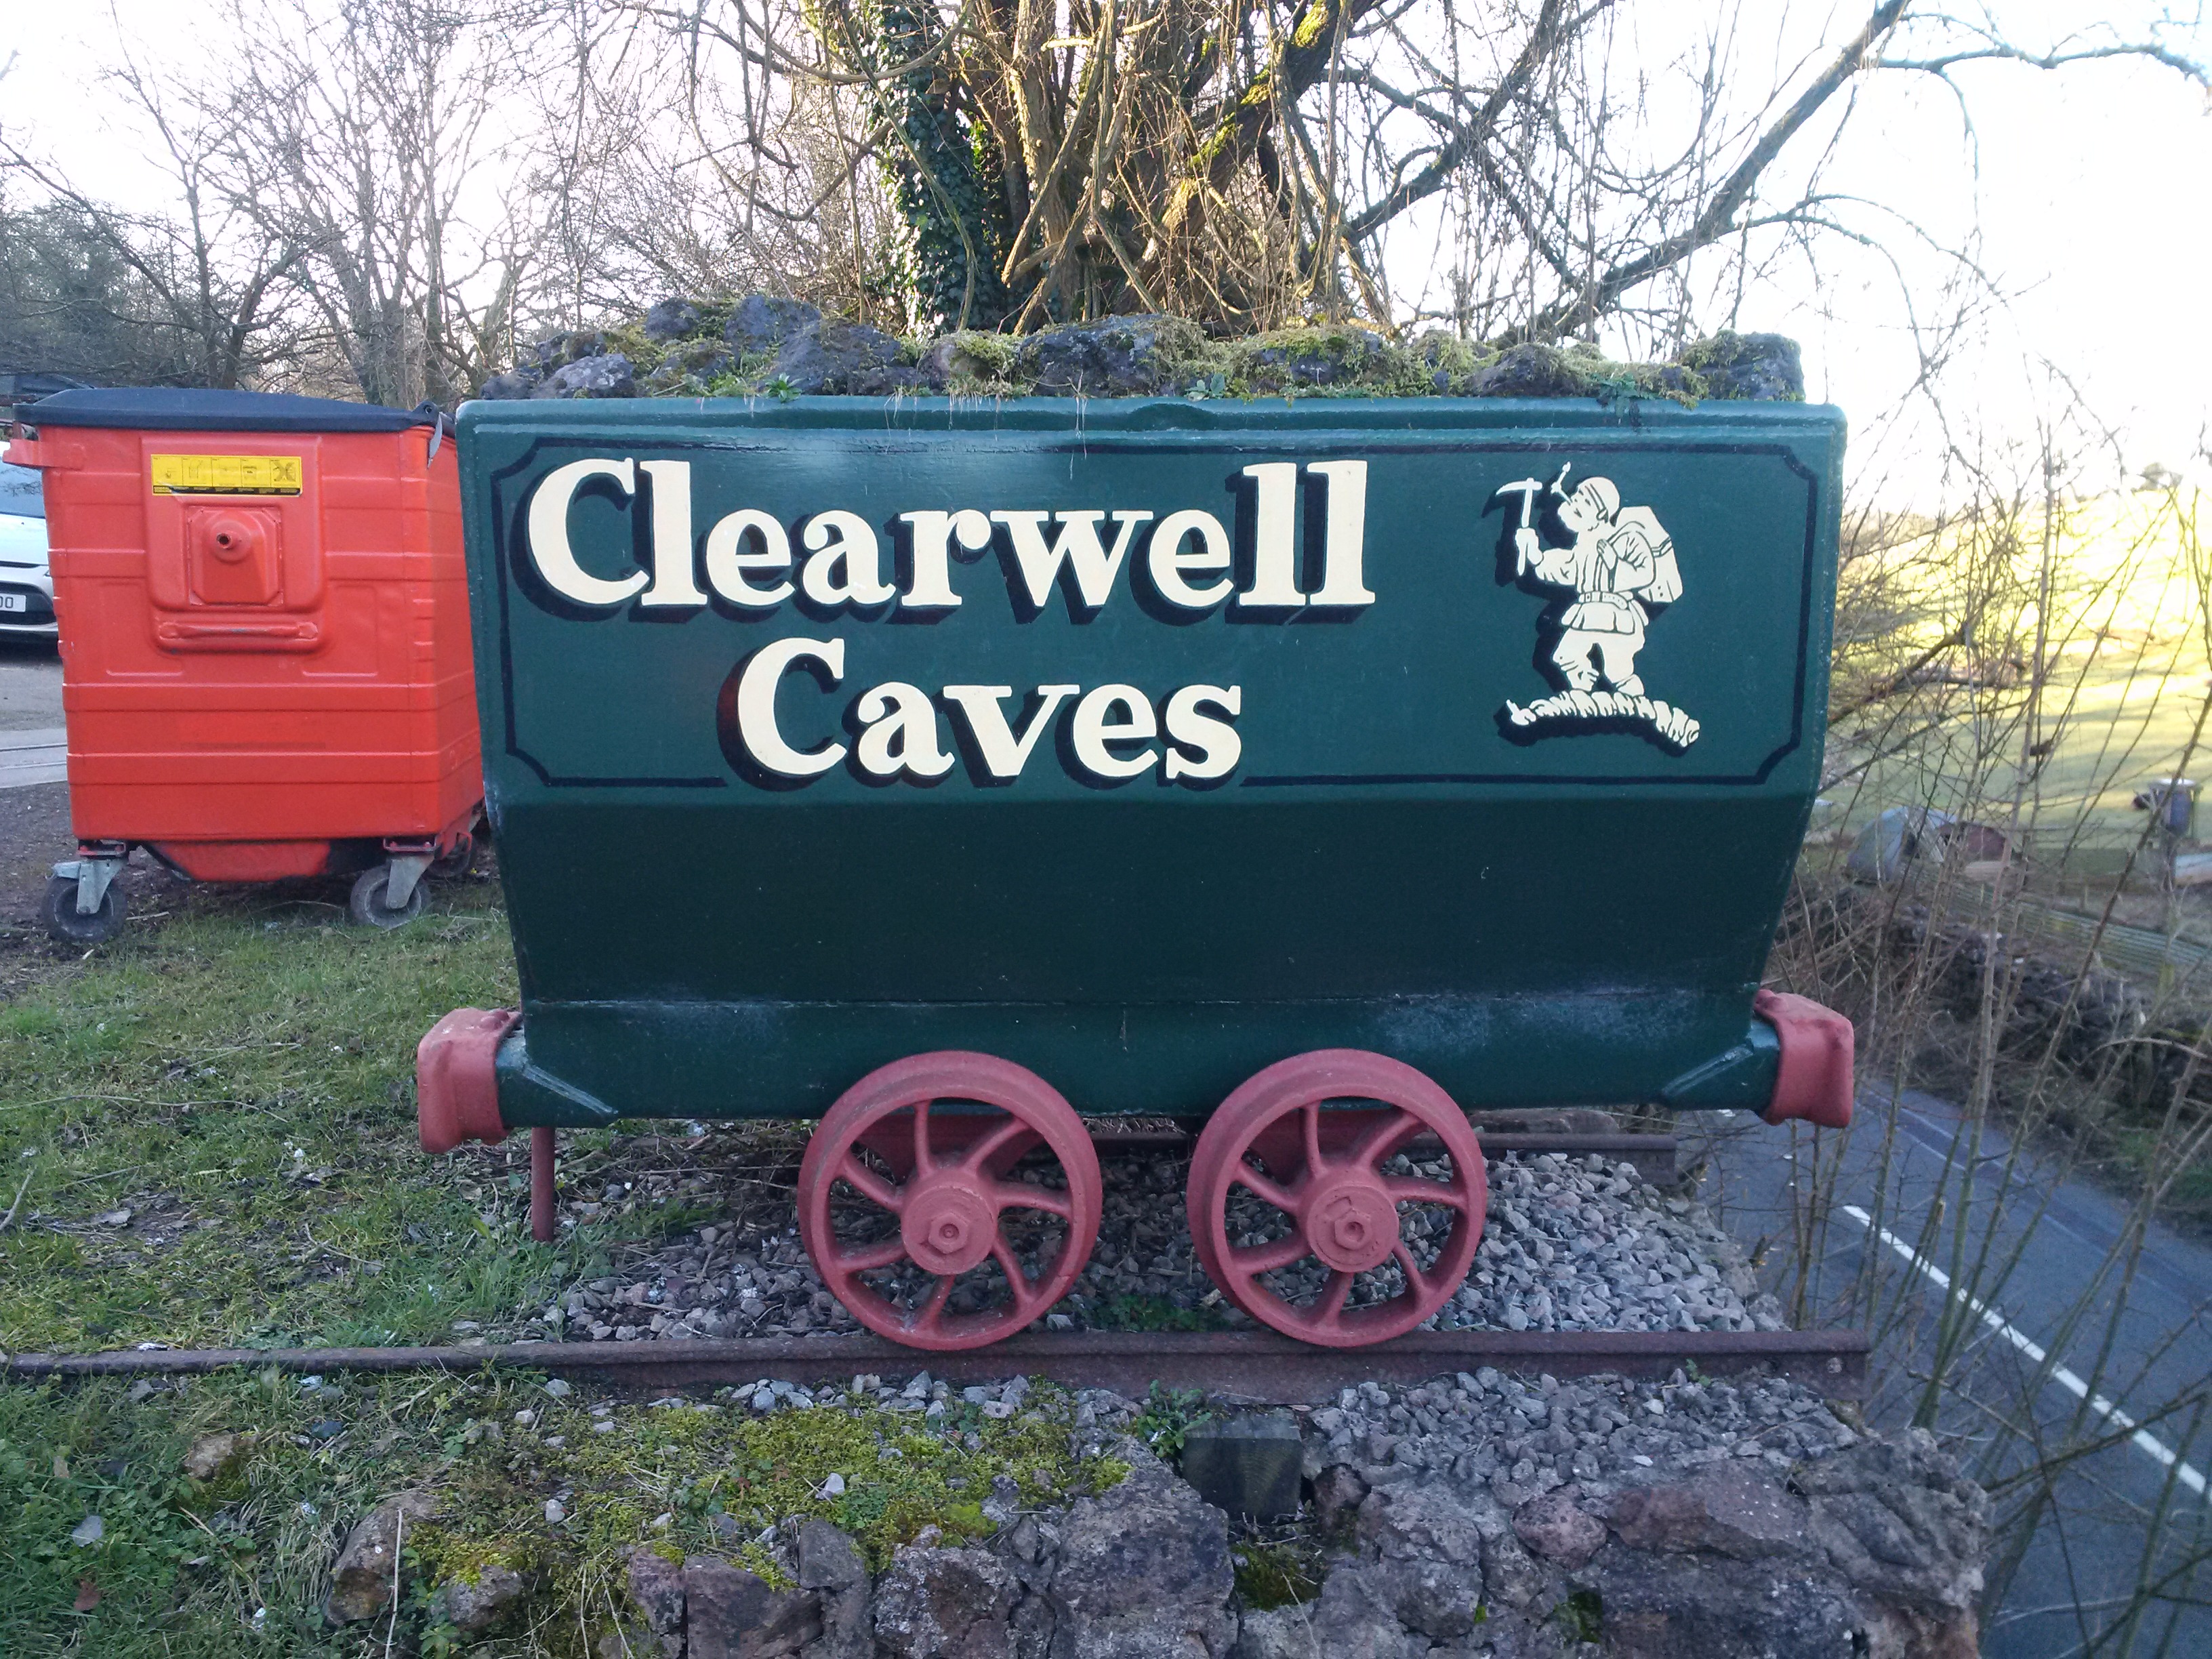 Clearwell Caves wagon side view